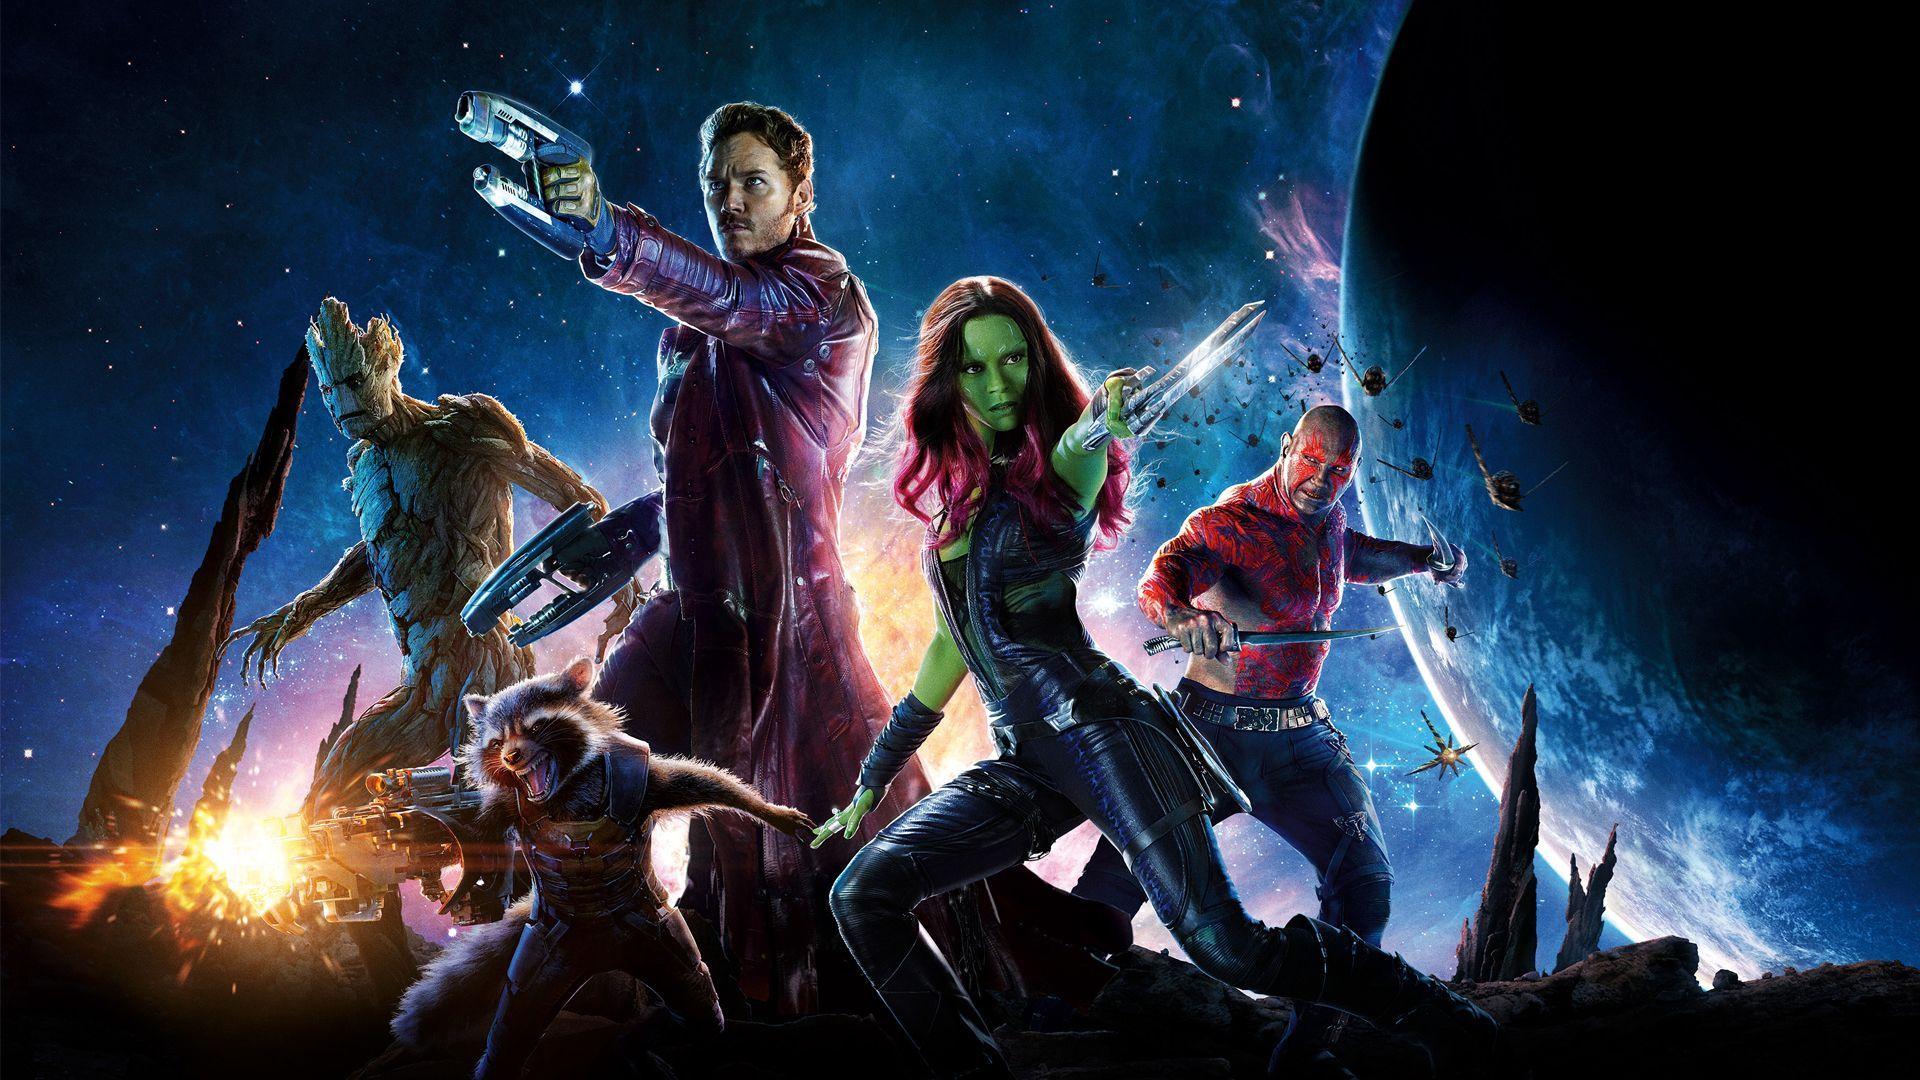 Robert Downey Jr. Says 'Guardians Of The Galaxy' is “The Best